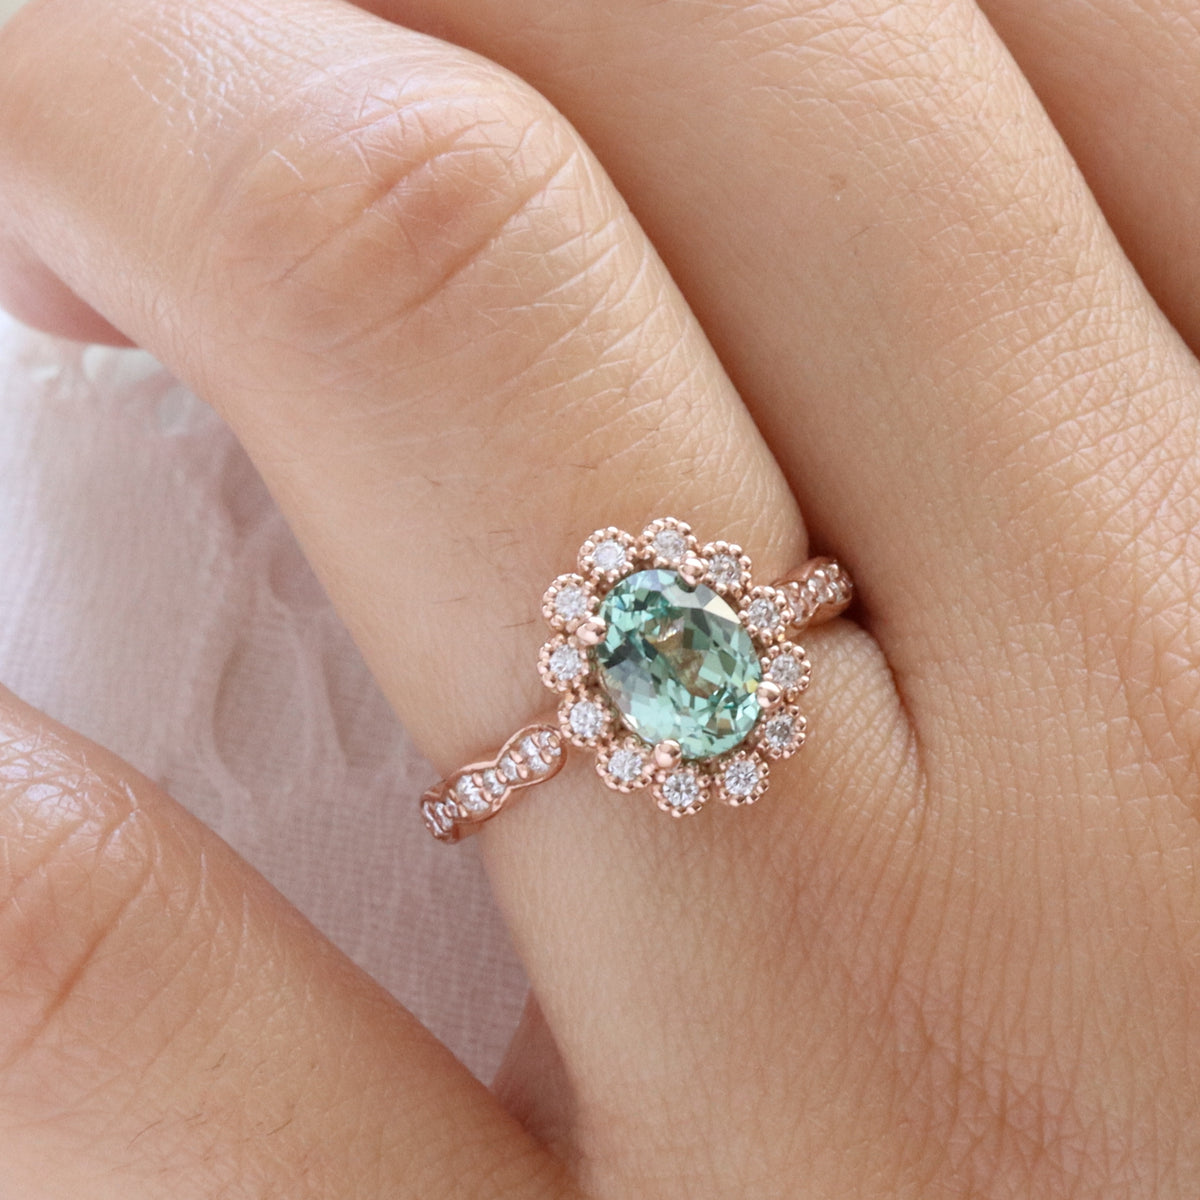 Oval seafoam green sapphire engagement ring rose gold vintage halo diamond sapphire ring la more design jewelry